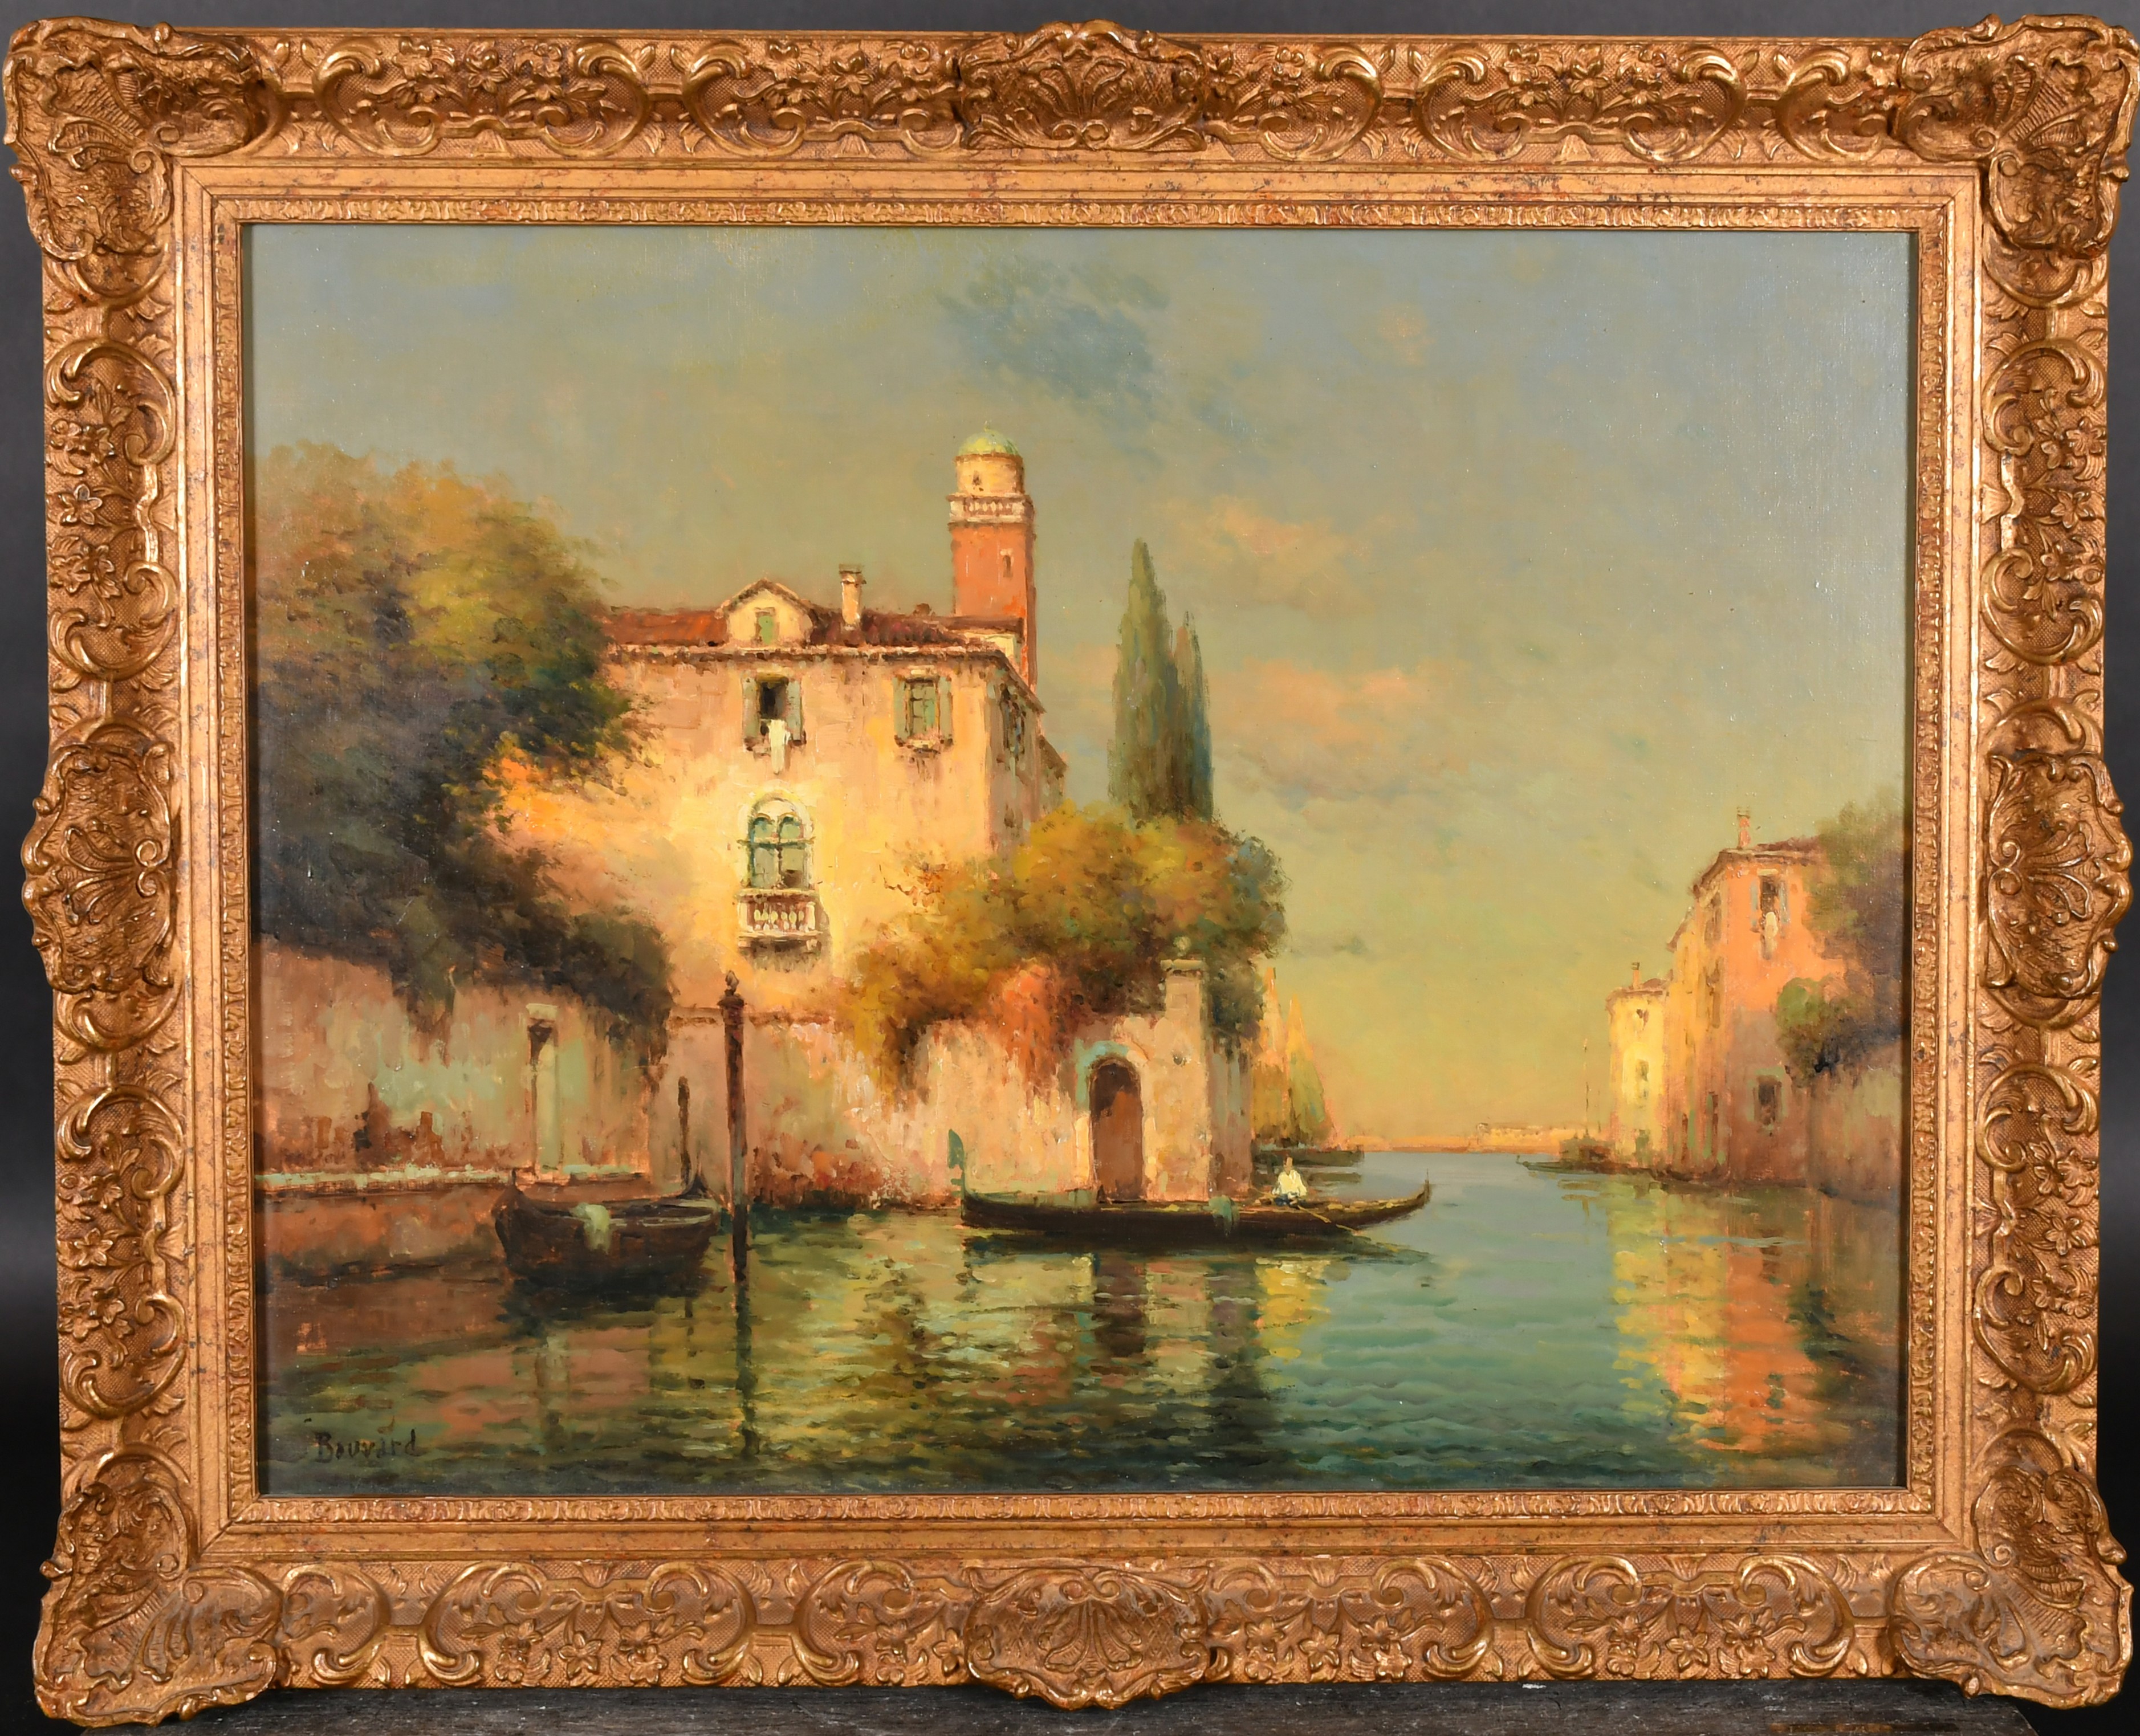 Noel Georges Bouvard (1912-1975) French. A Venetian Canal Scene, Oil on canvas, Signed, 19.5" x 25. - Image 2 of 4